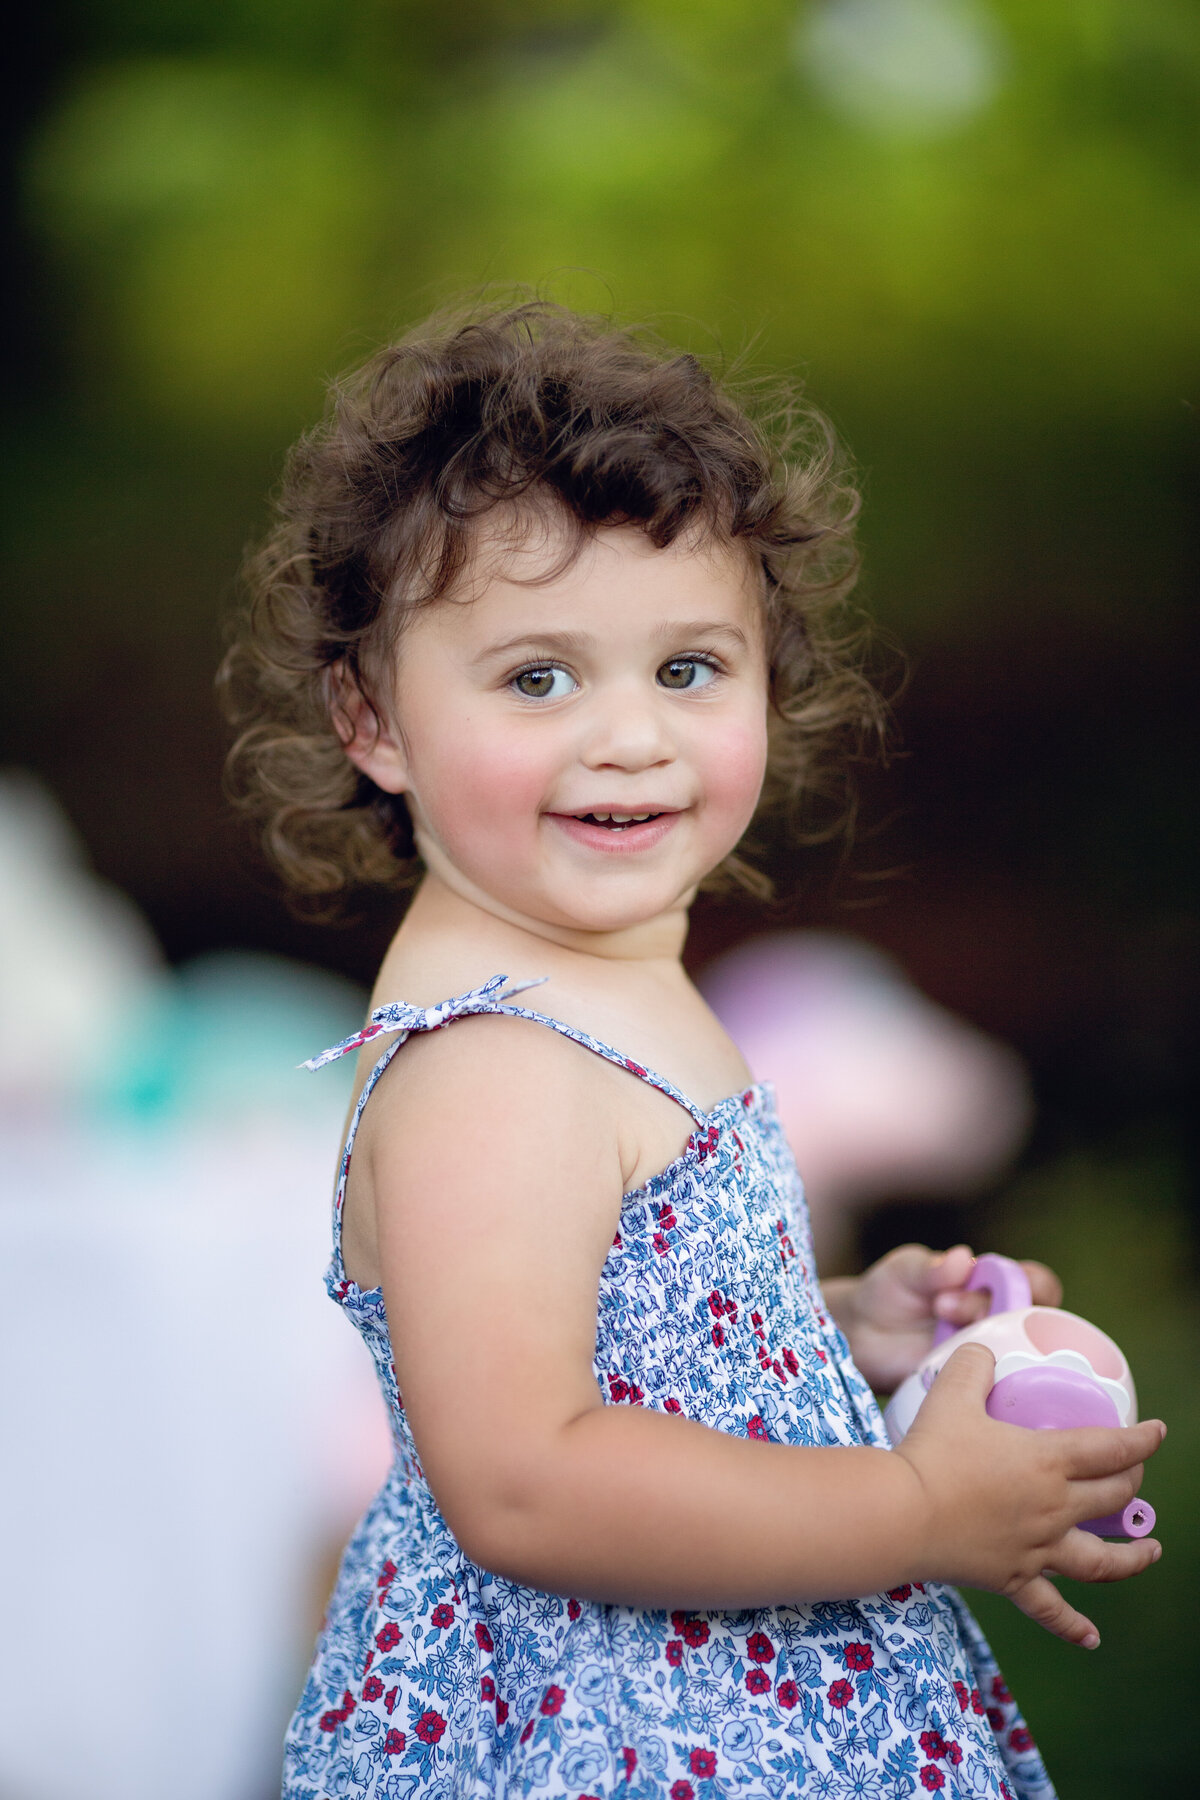 A toddler girl in a blue floral print dress plays with a toy in a park